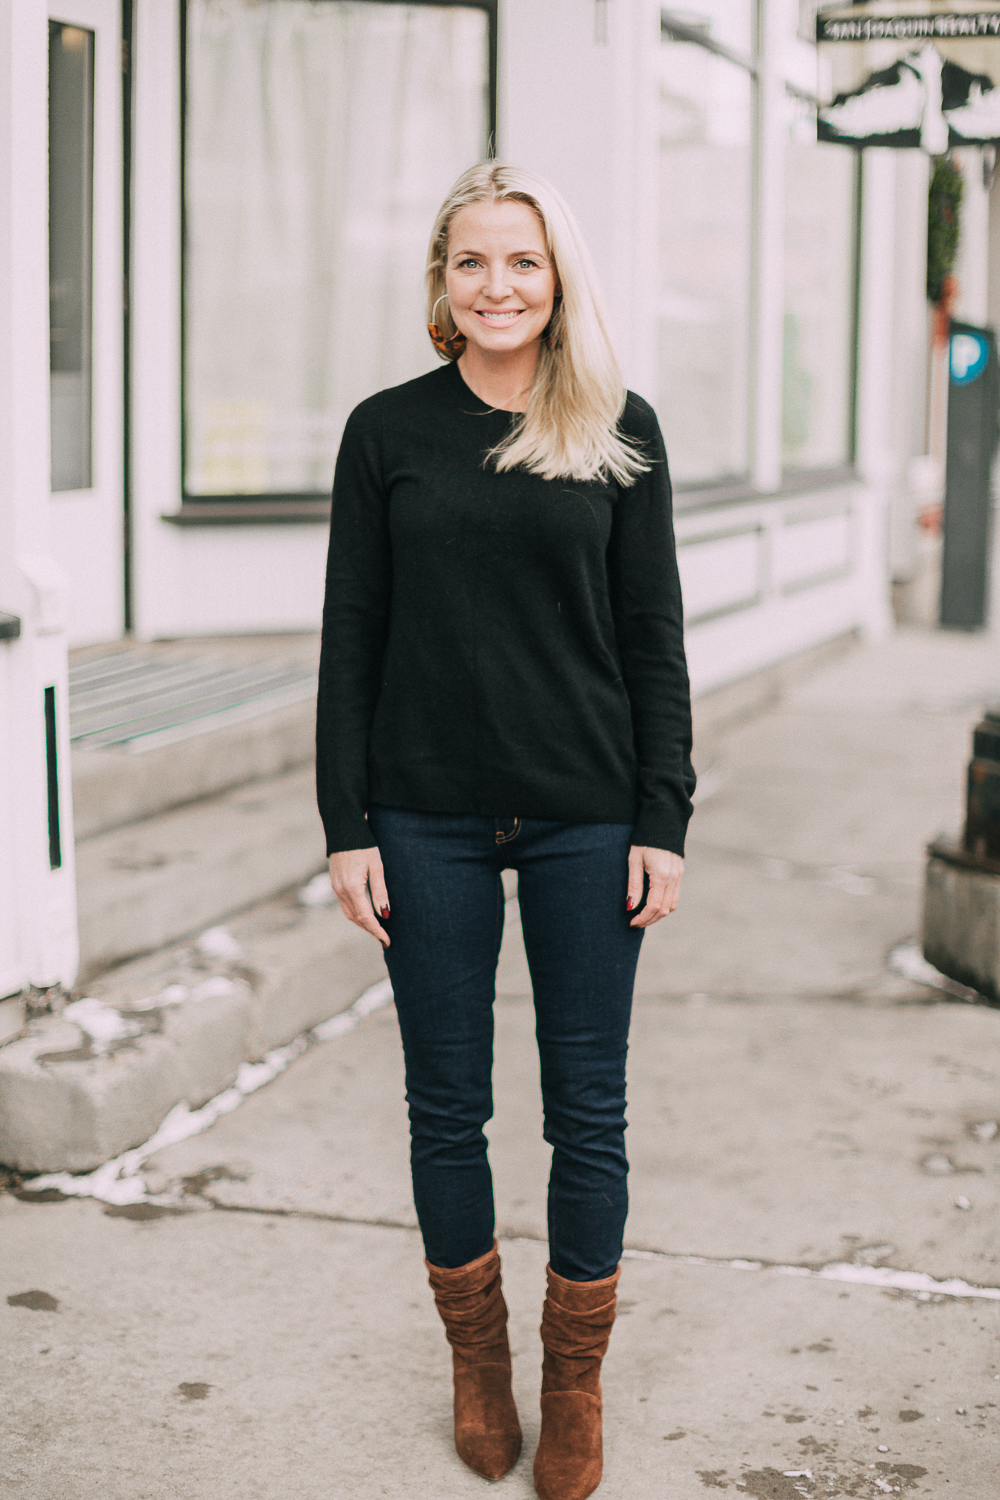 wardrobe staples your closet needs including a black cashmere crewneck sweater and high rise dark wash skinny jeans both from Walmart